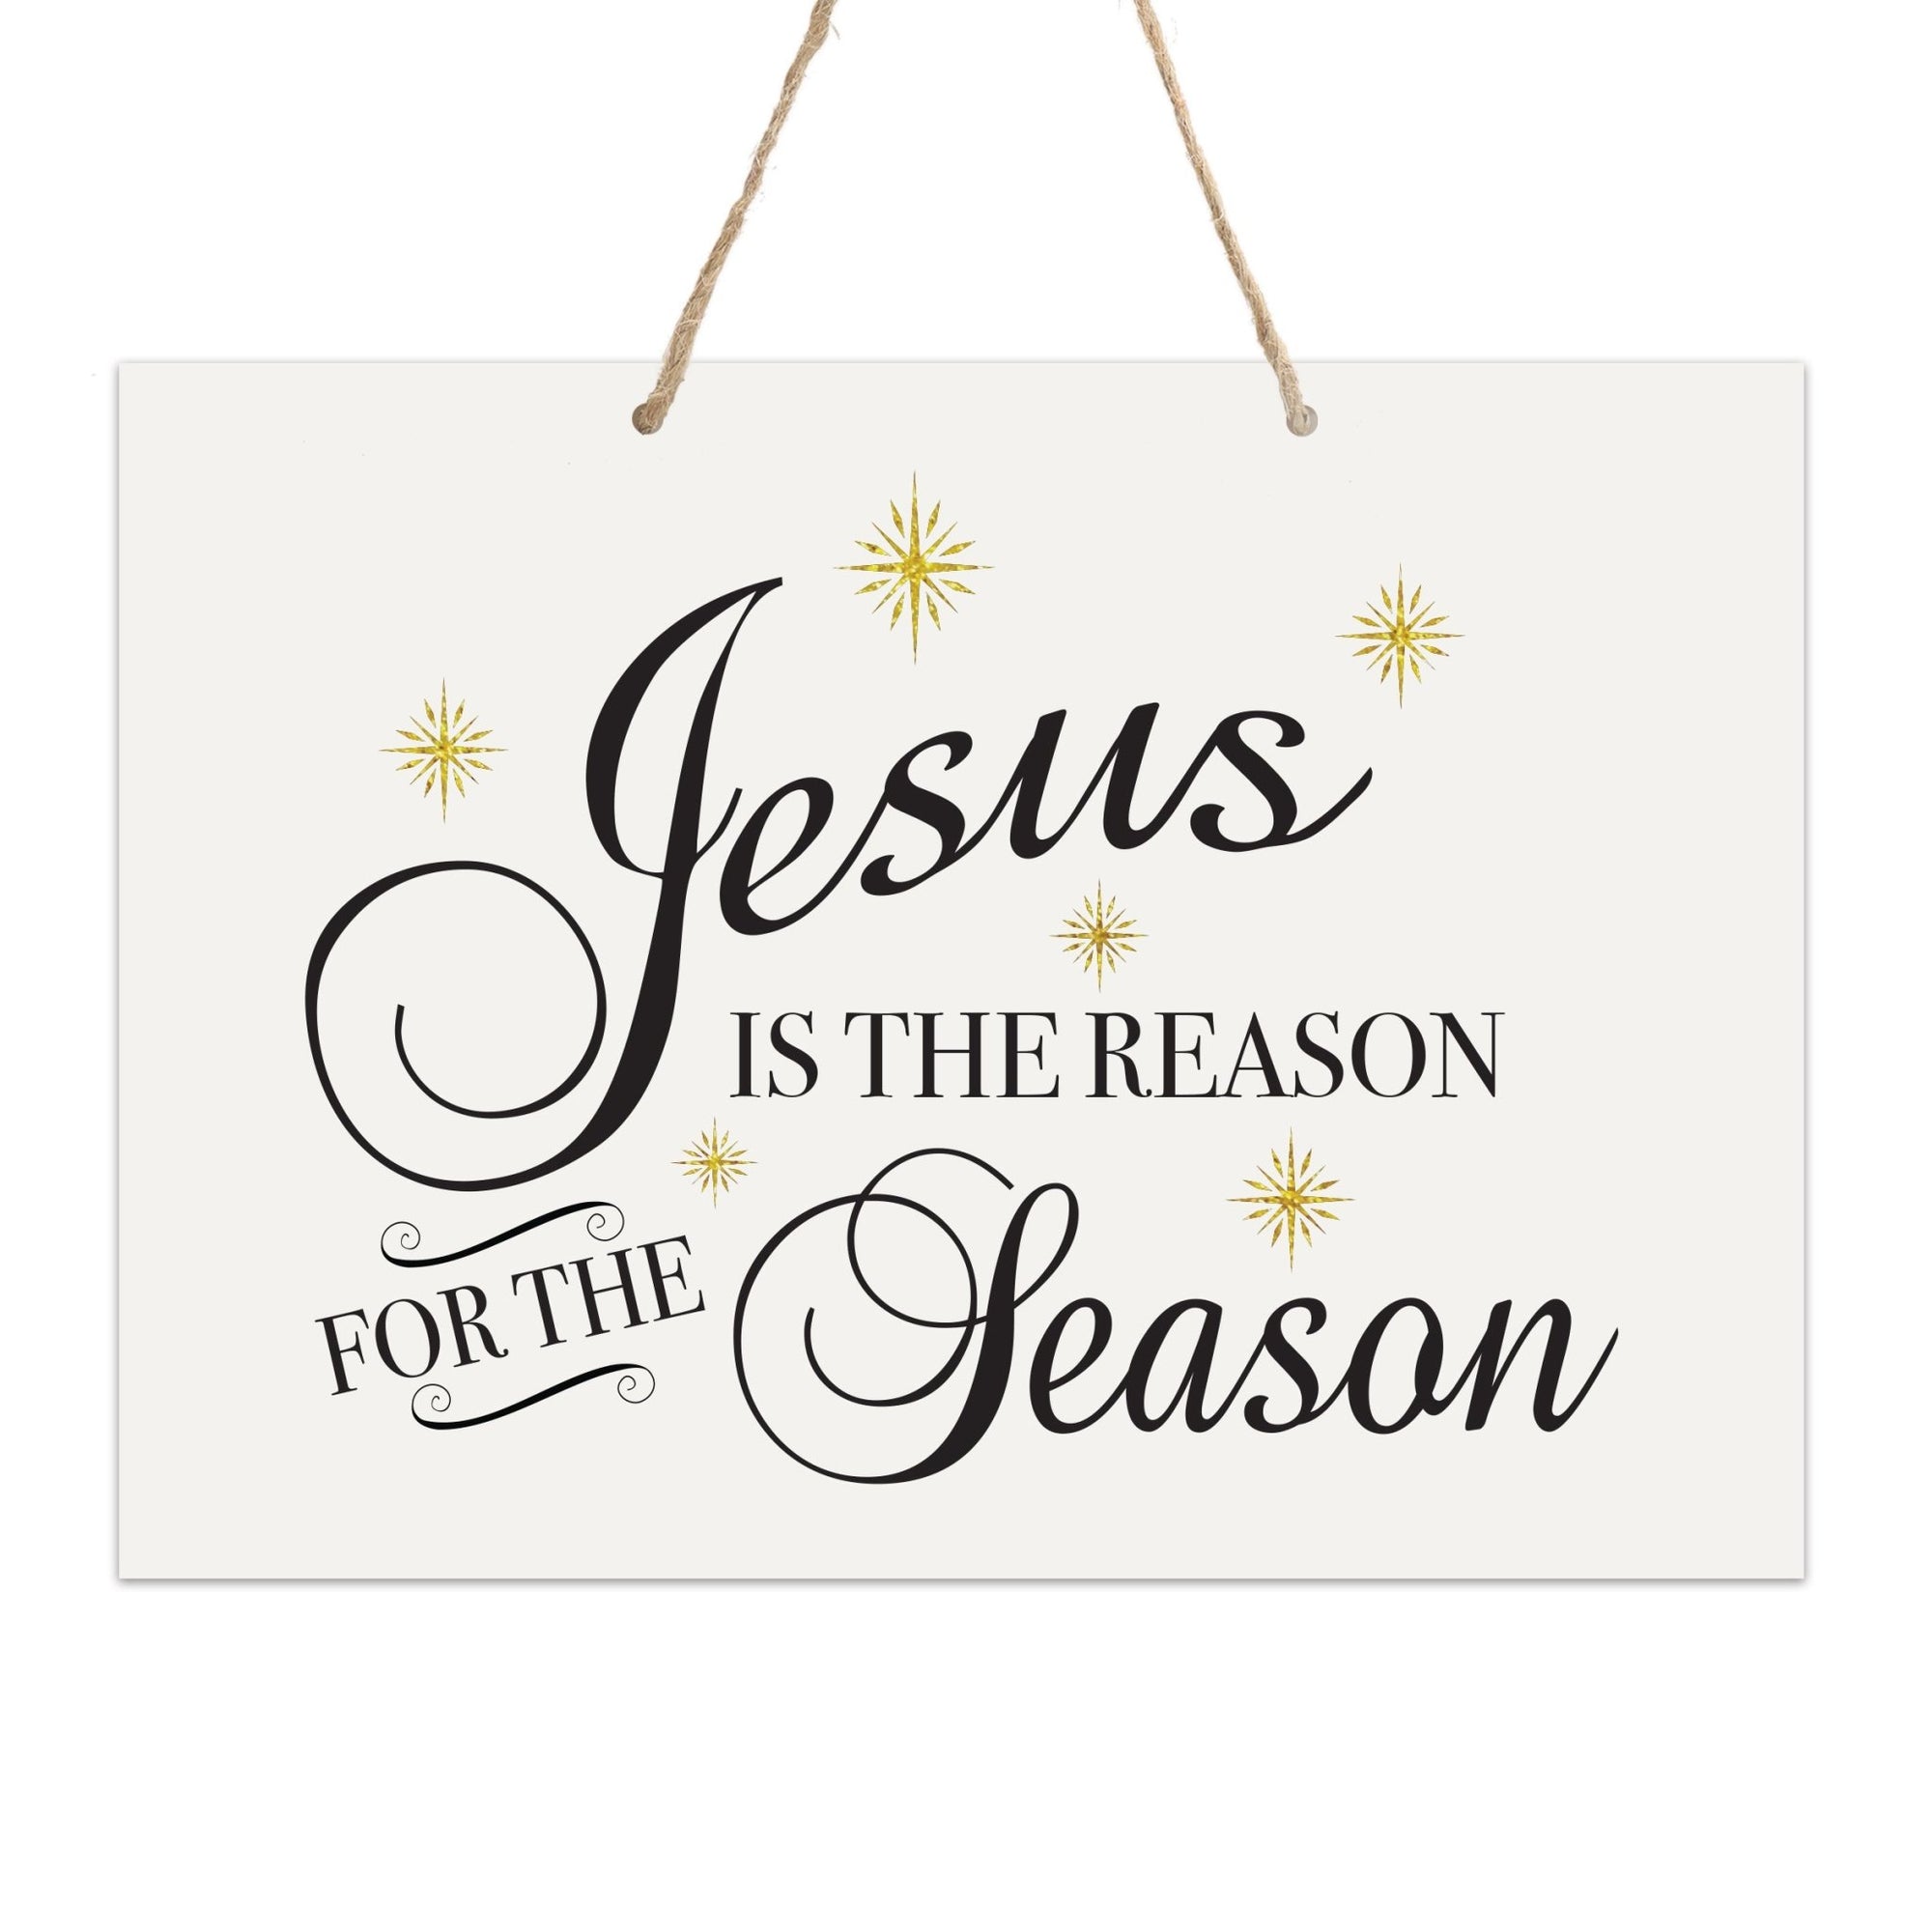 Merry Christmas Wall Hanging Sign - Jesus Is The Reason - LifeSong Milestones